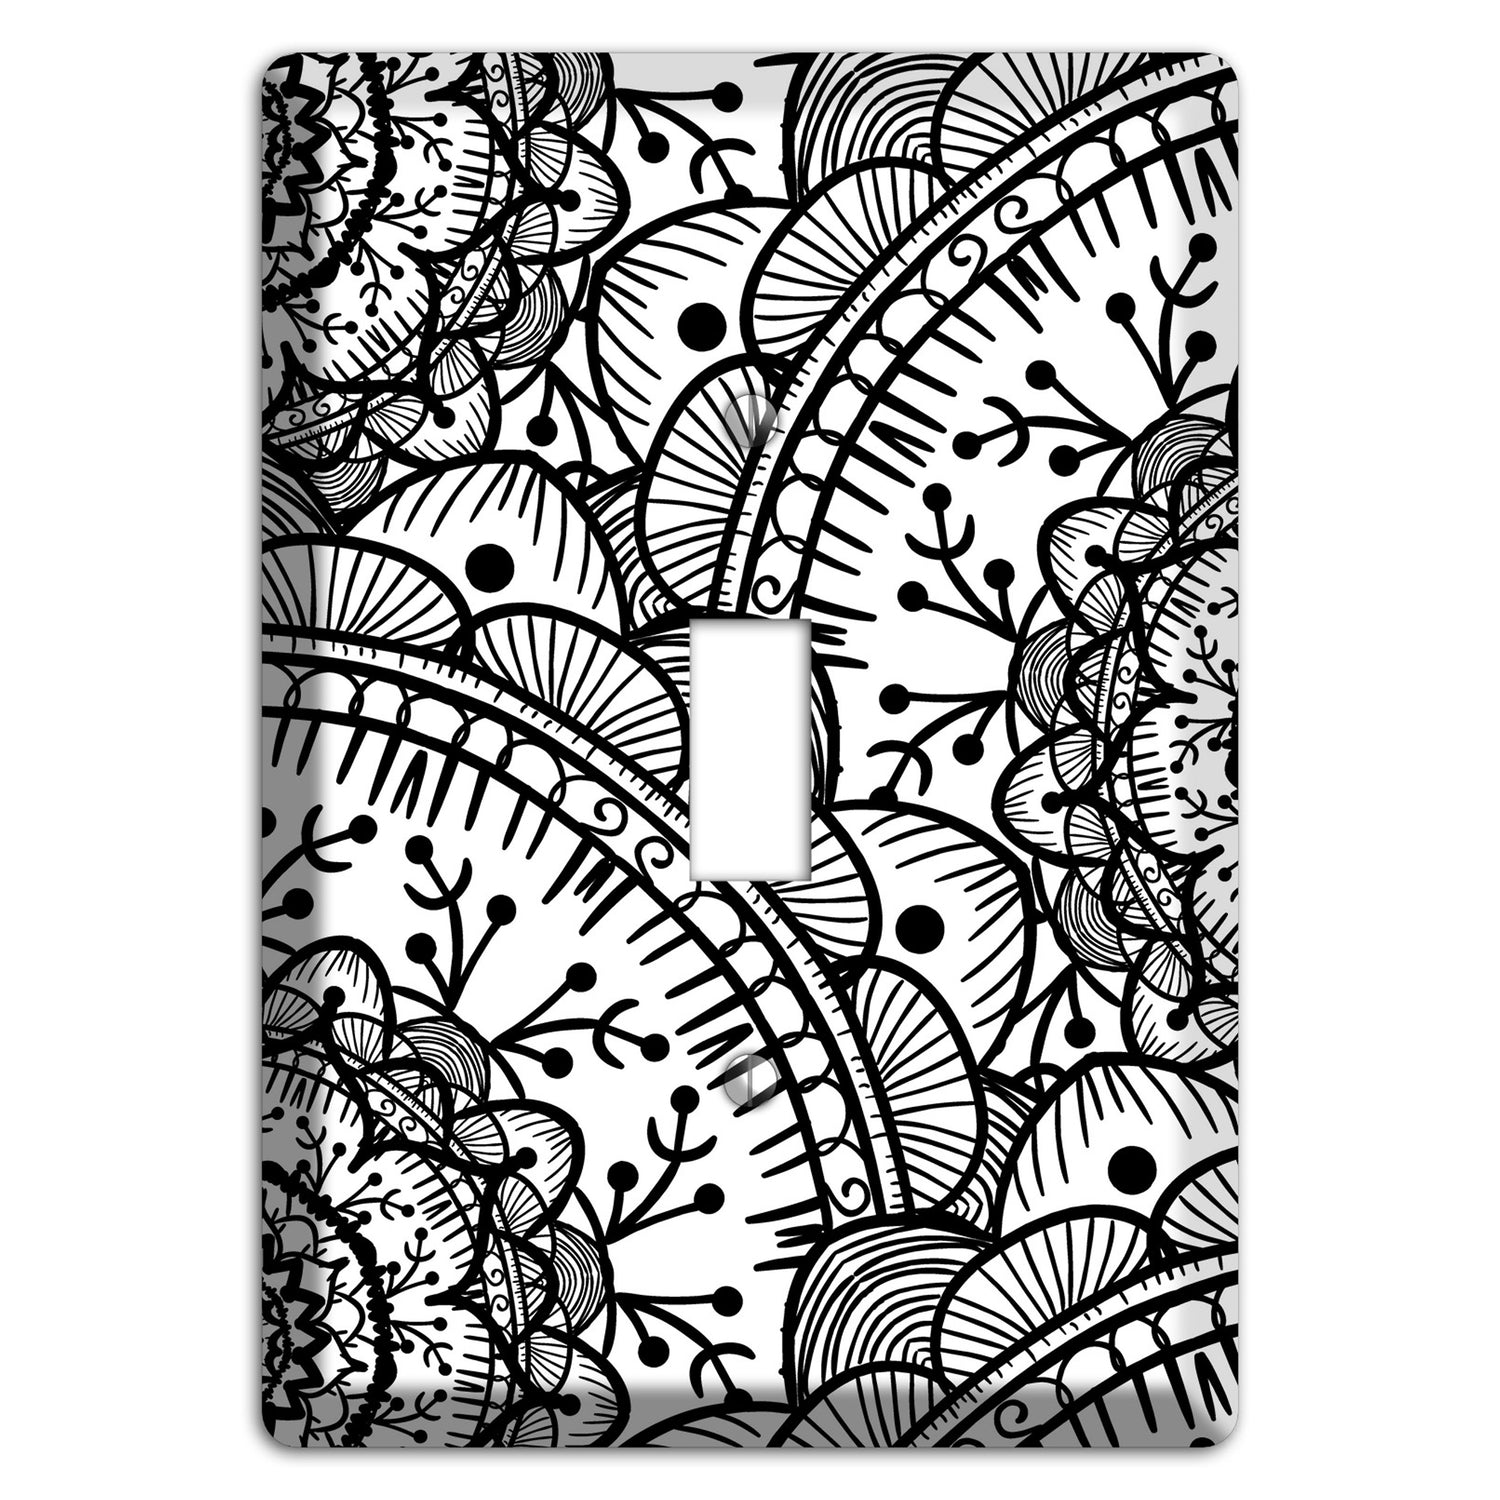 Mandala Black and White Style Q Cover Plates Cover Plates